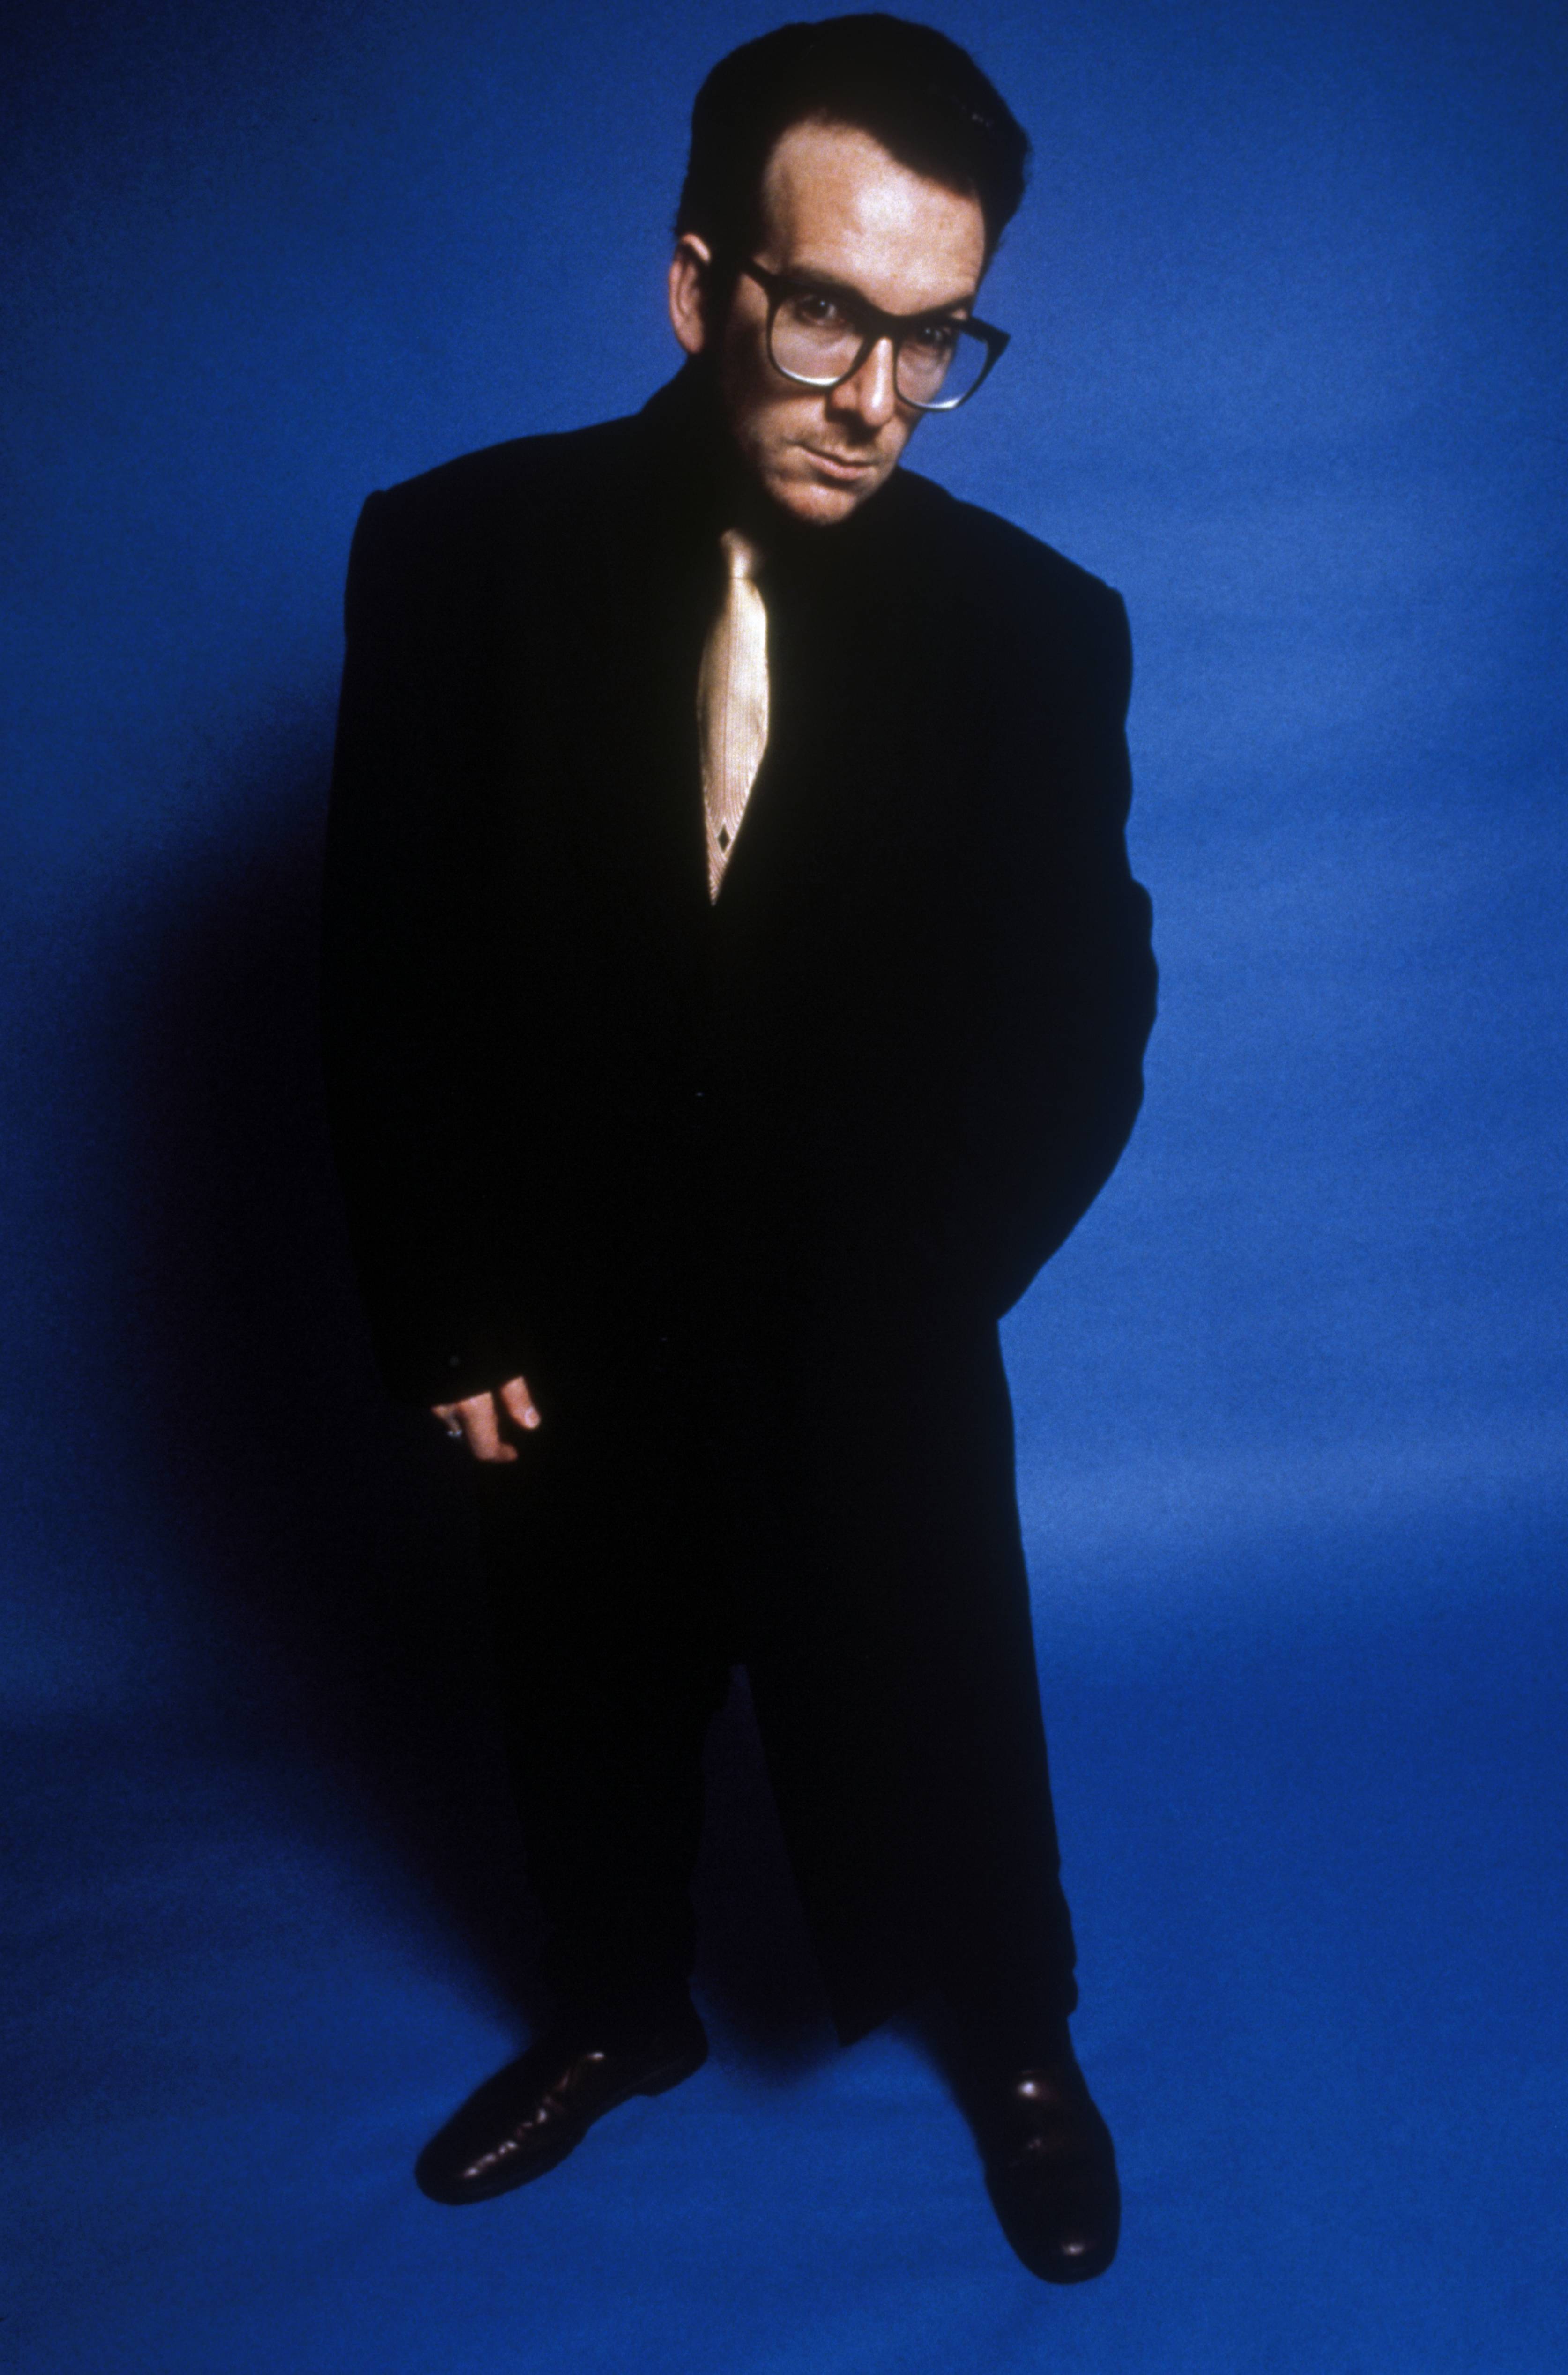 Elvis Costello: Our 1989 Cover Story